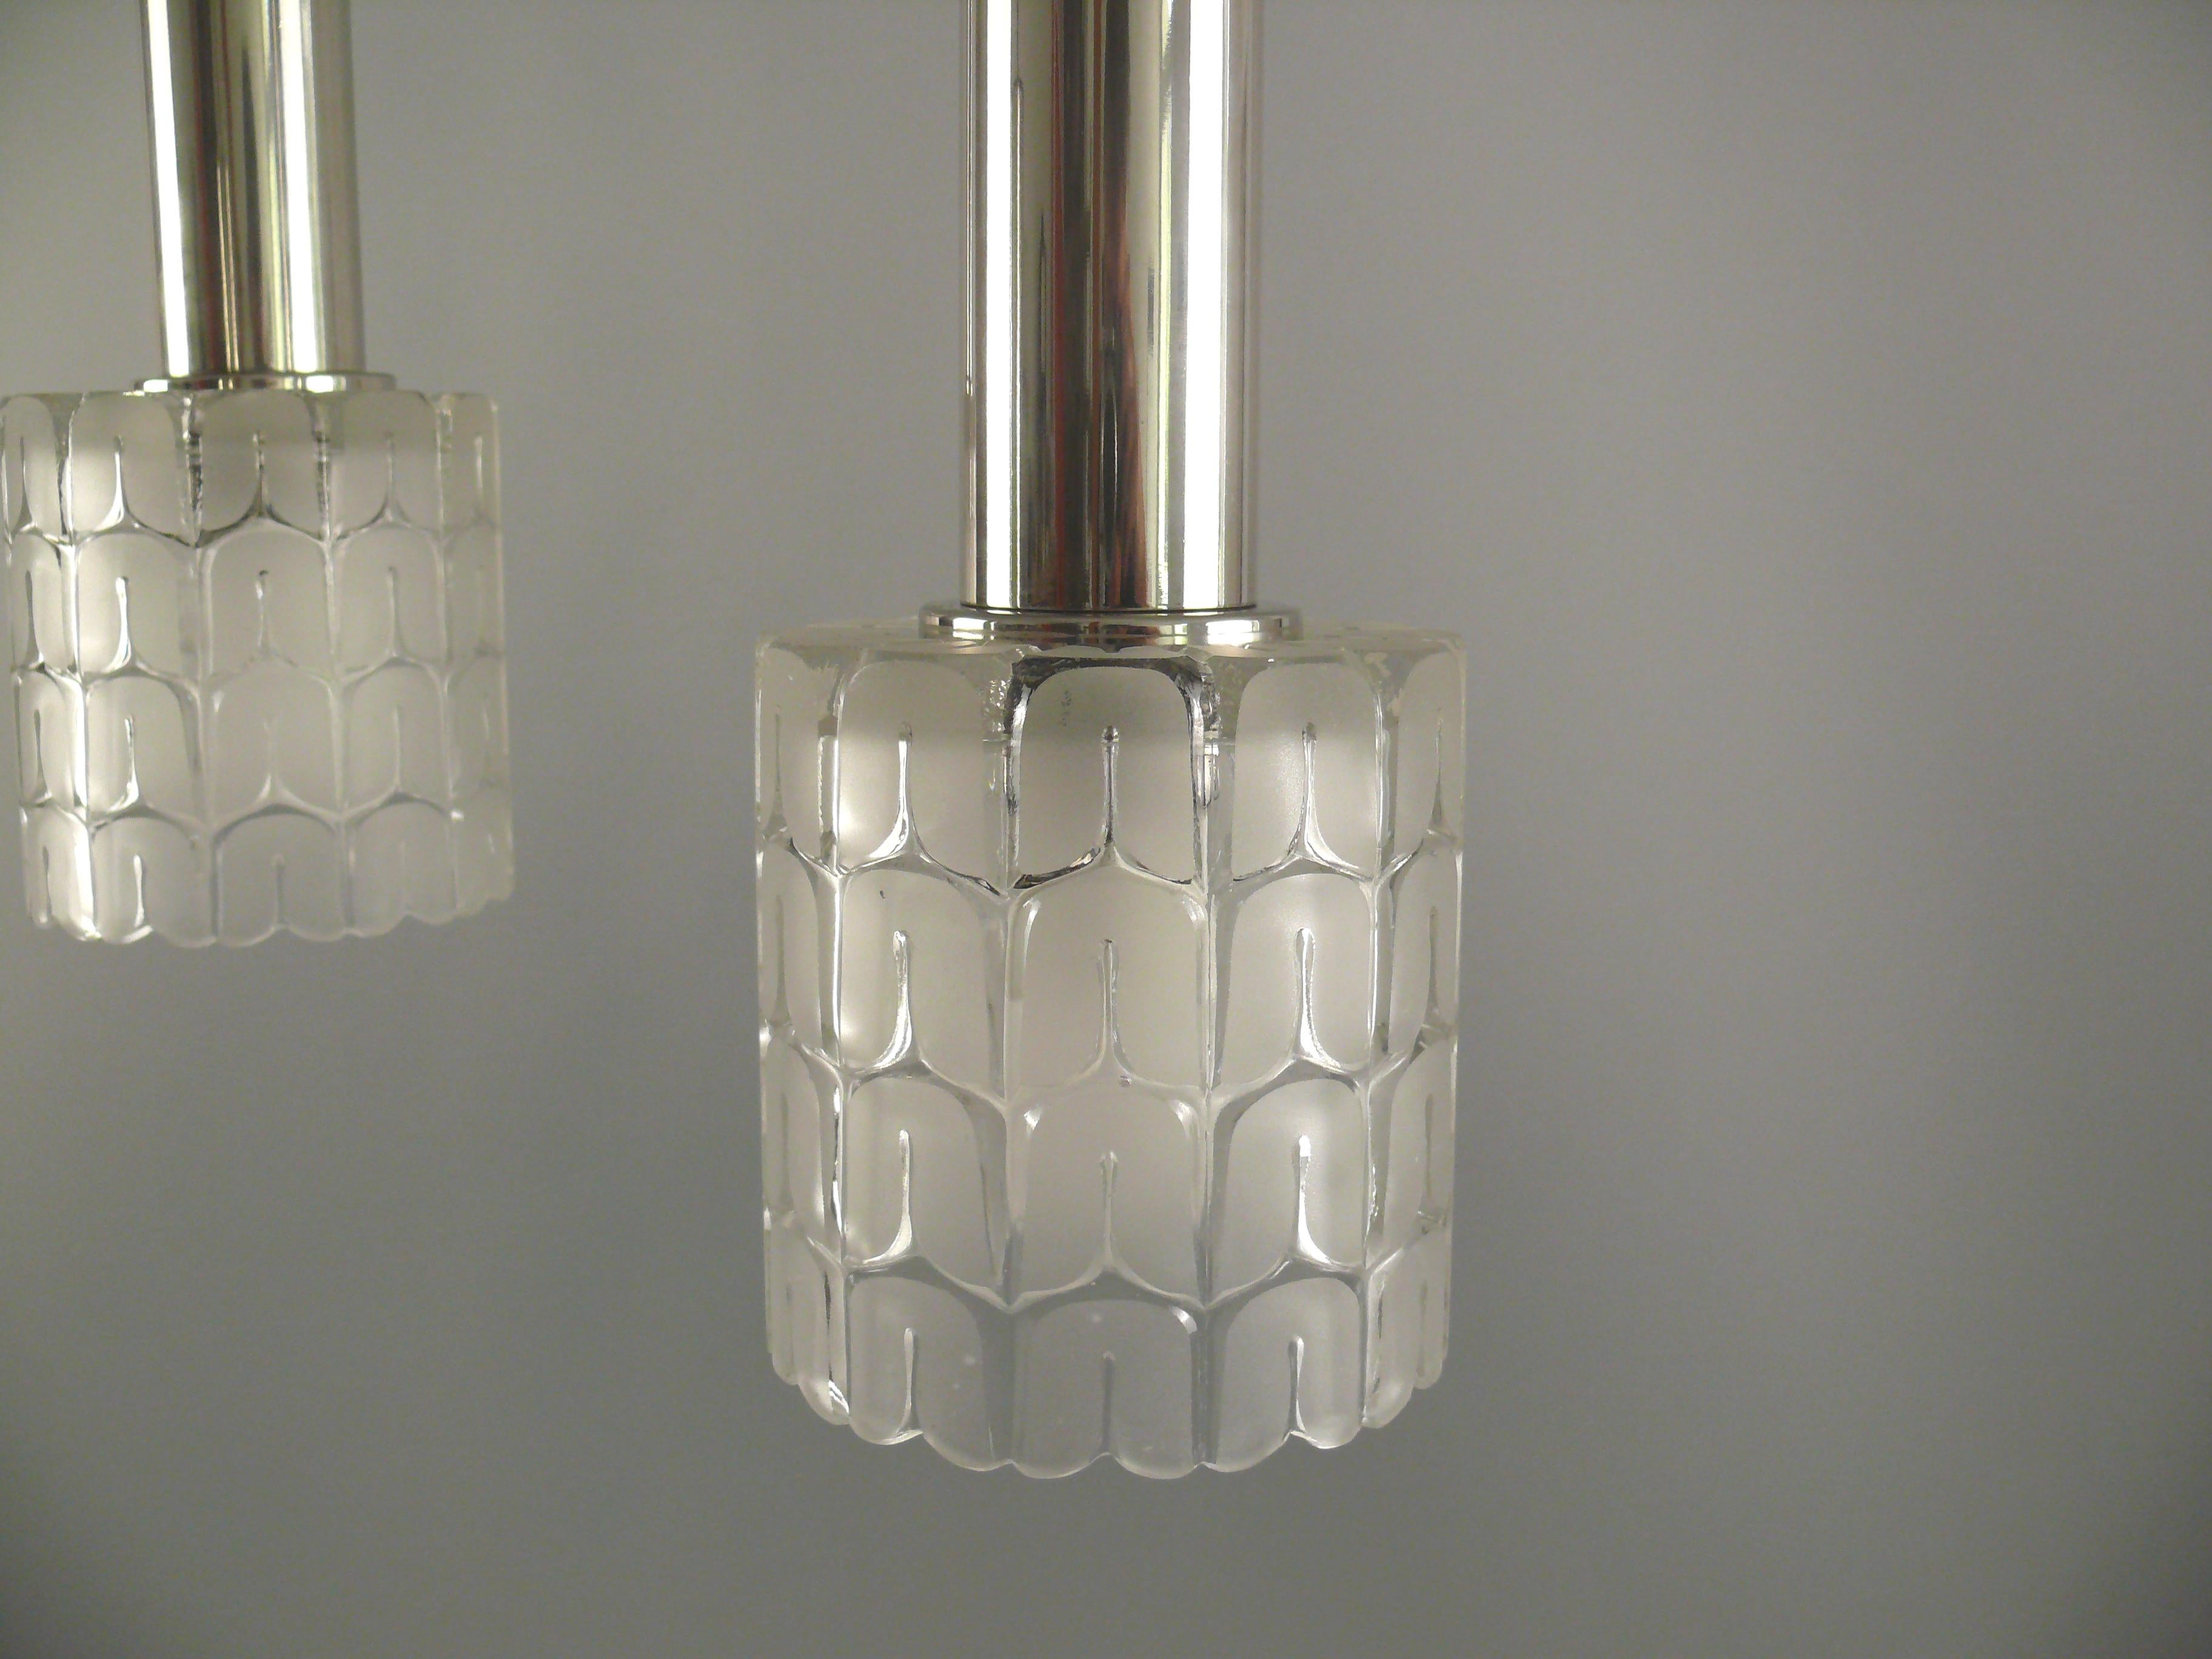 Hillebrand Ceiling Lamp, Cascade Lamp, Pendant Lamp, 1970s In Good Condition For Sale In Schwerin, MV